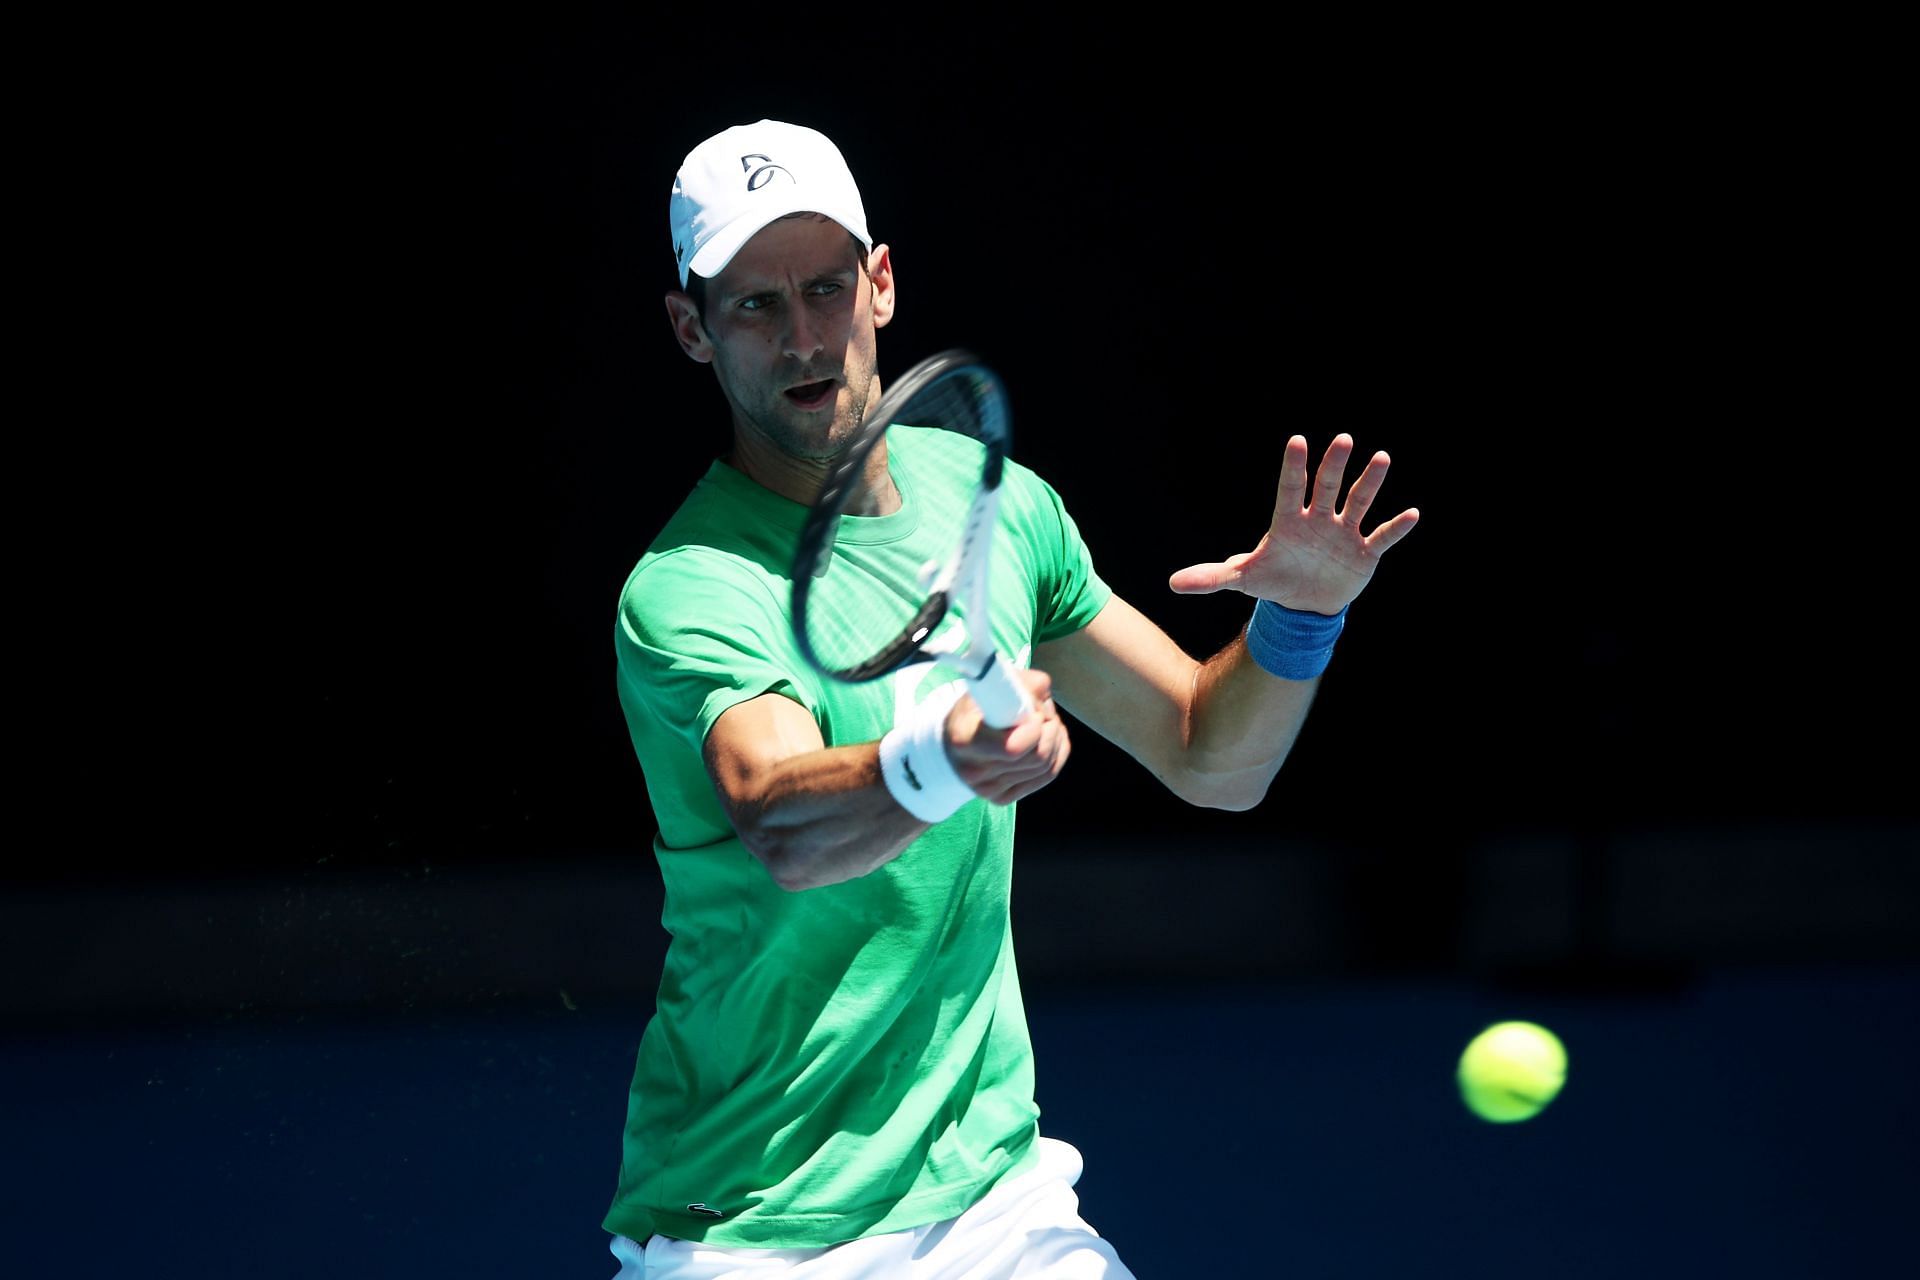 Novak Djokovic during a practice session ahead of the Austraian Open 2022